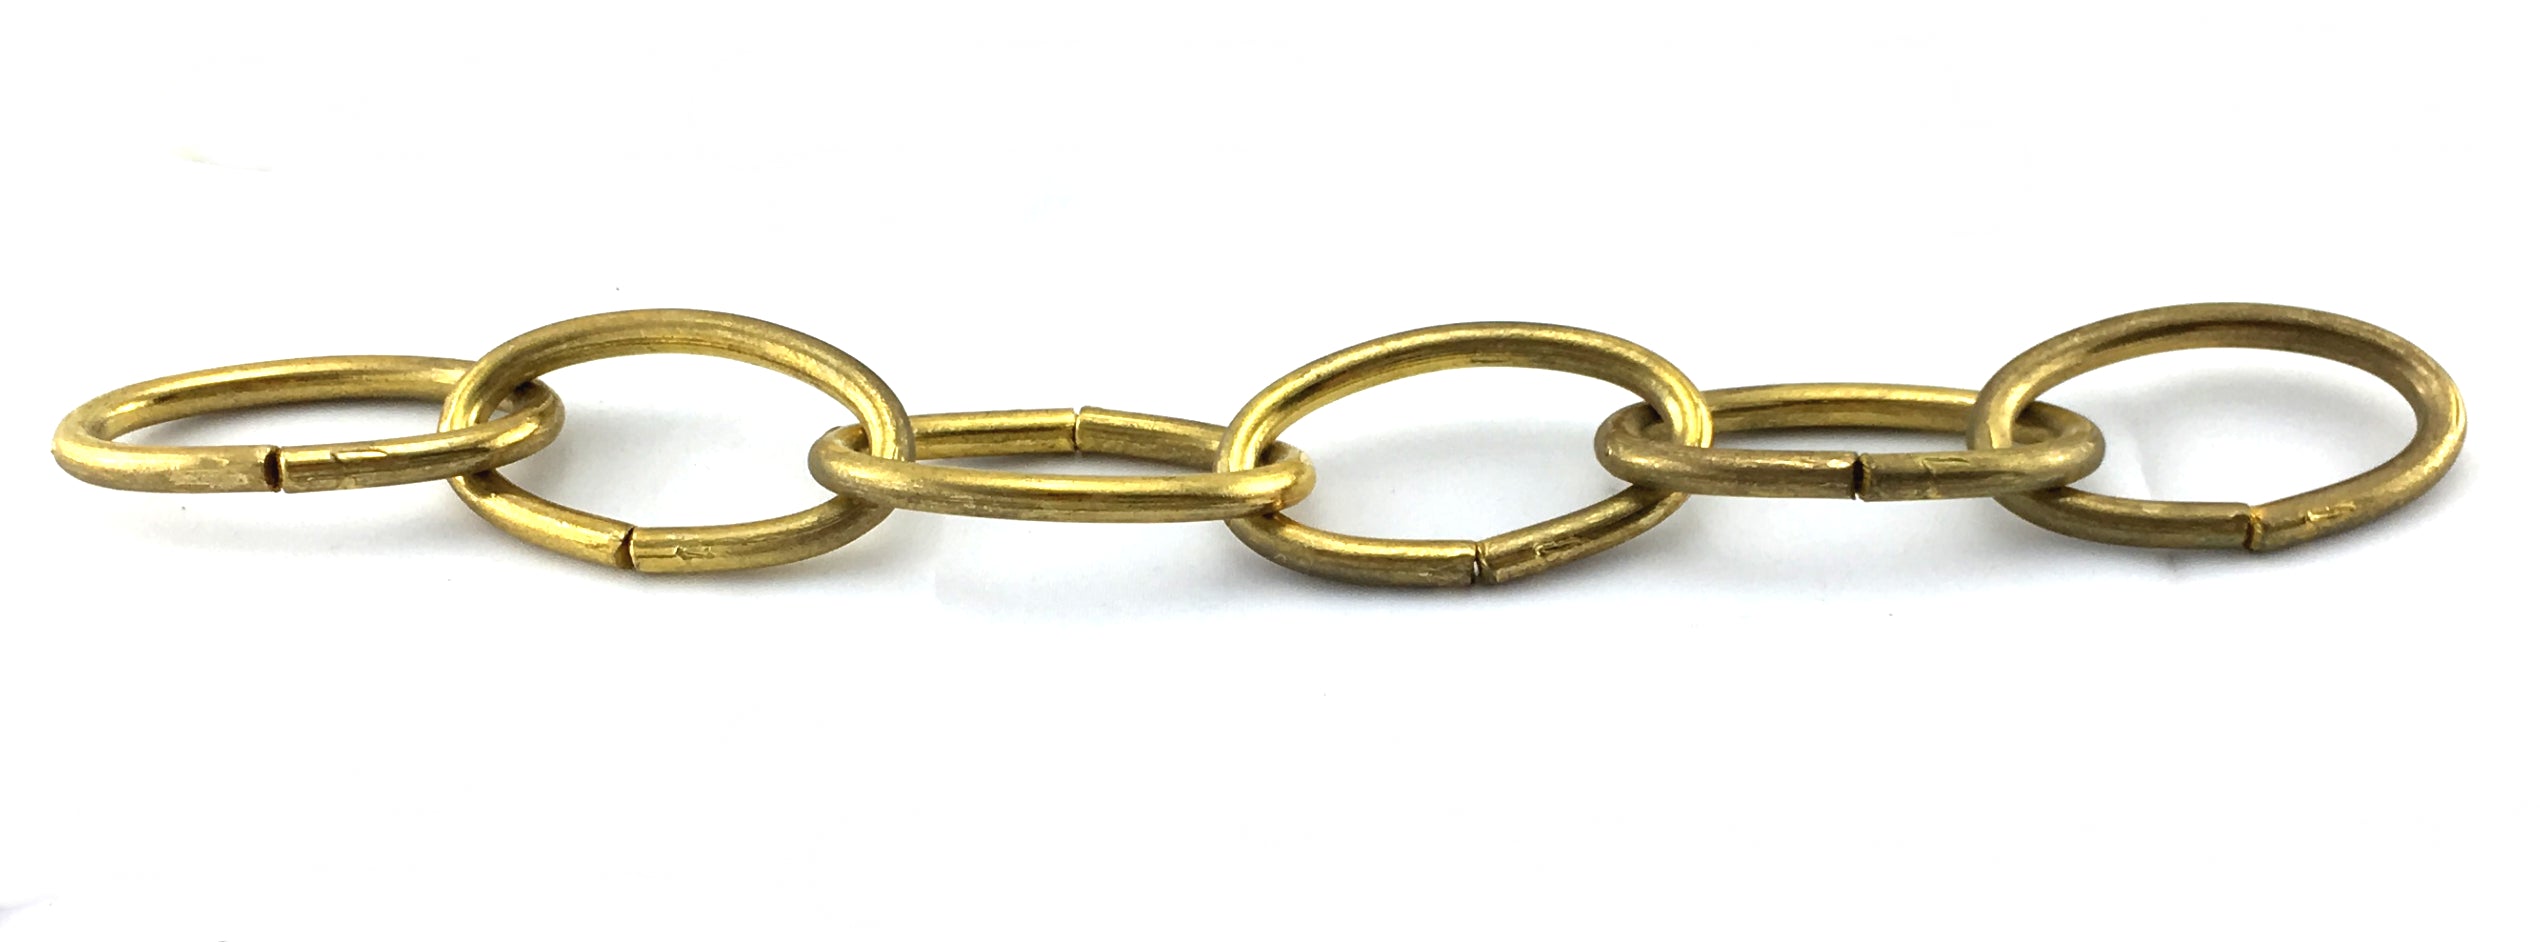 Lighting Chain - Gold Plated, size 3.8mm. Order by the metre. Melbourne and Australia wide.